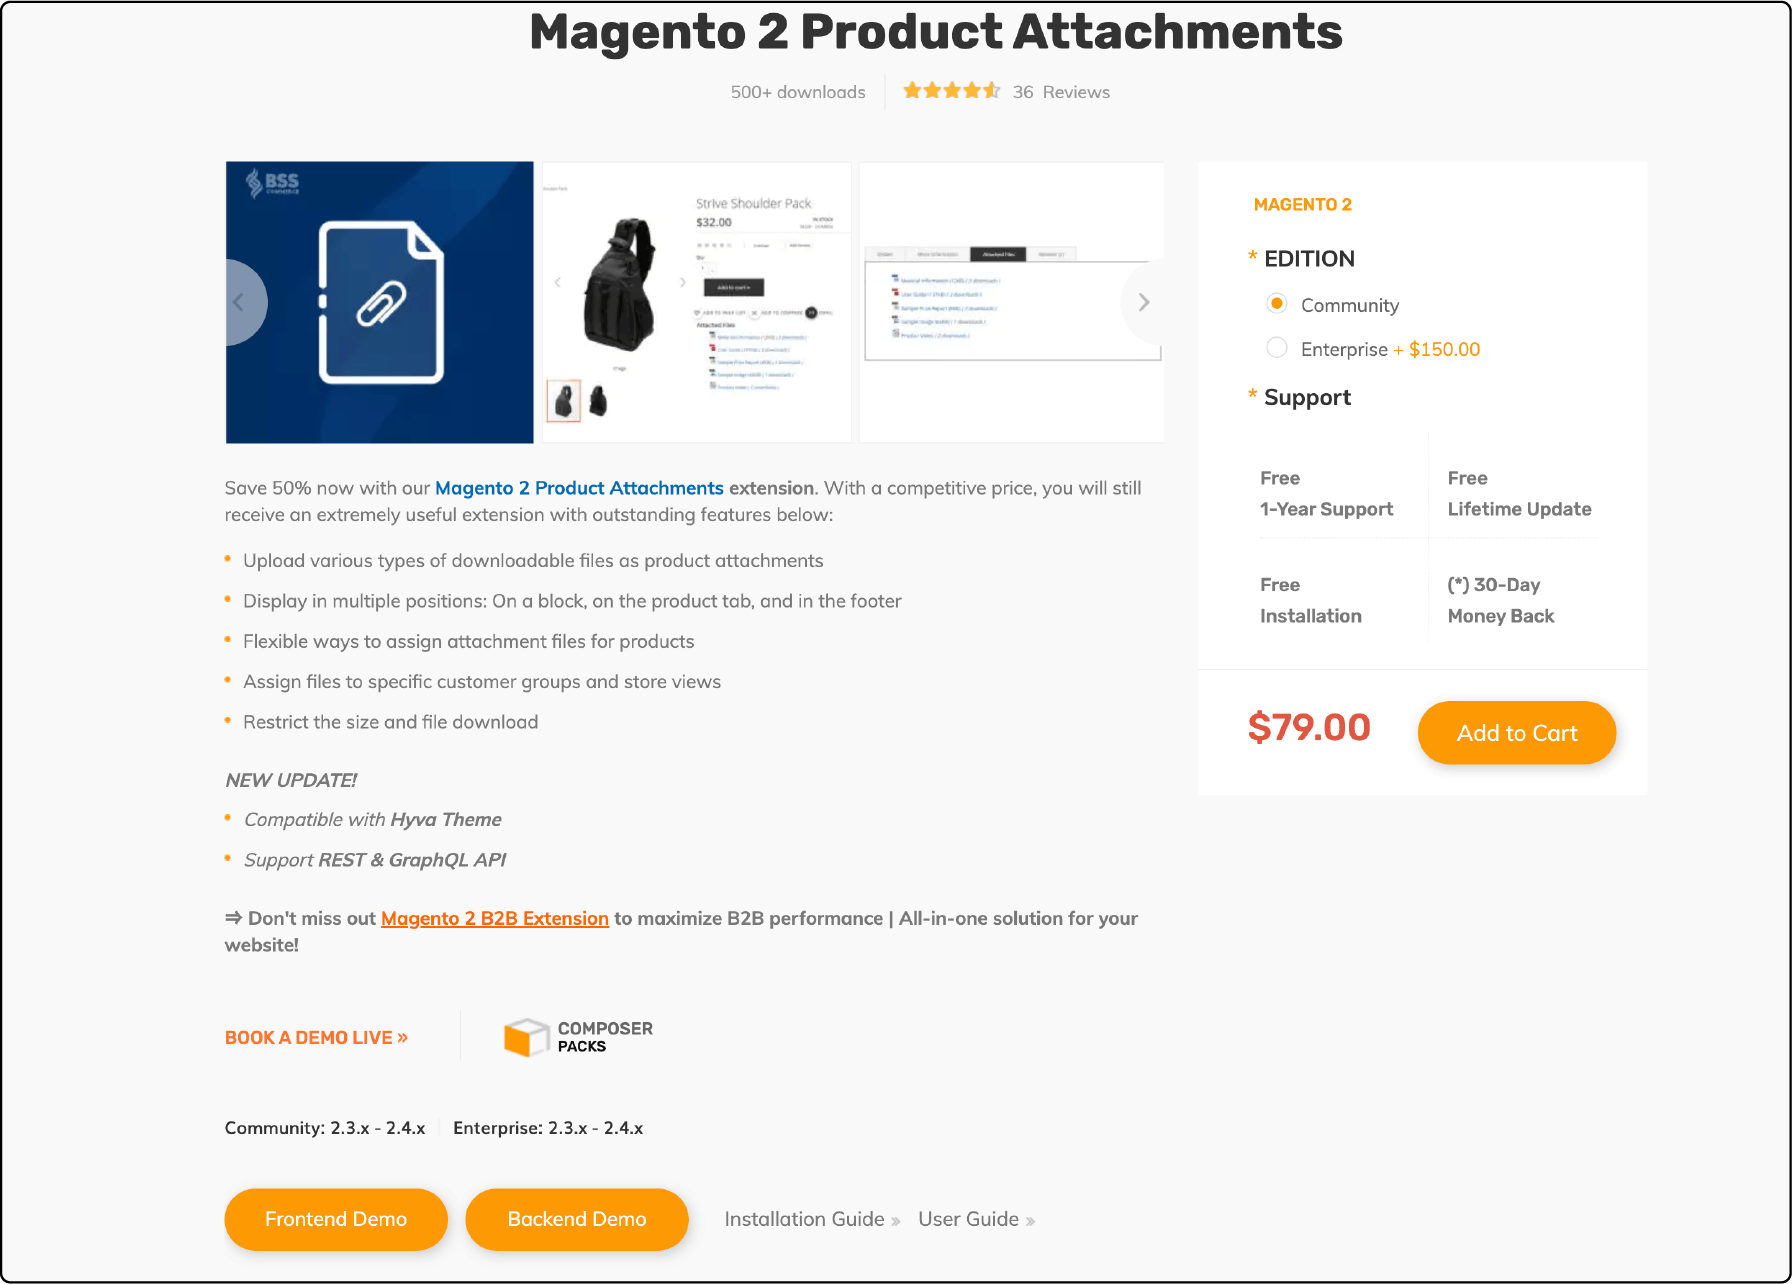 BSS Commerce's Magento 2 Product Attachments Screenshot